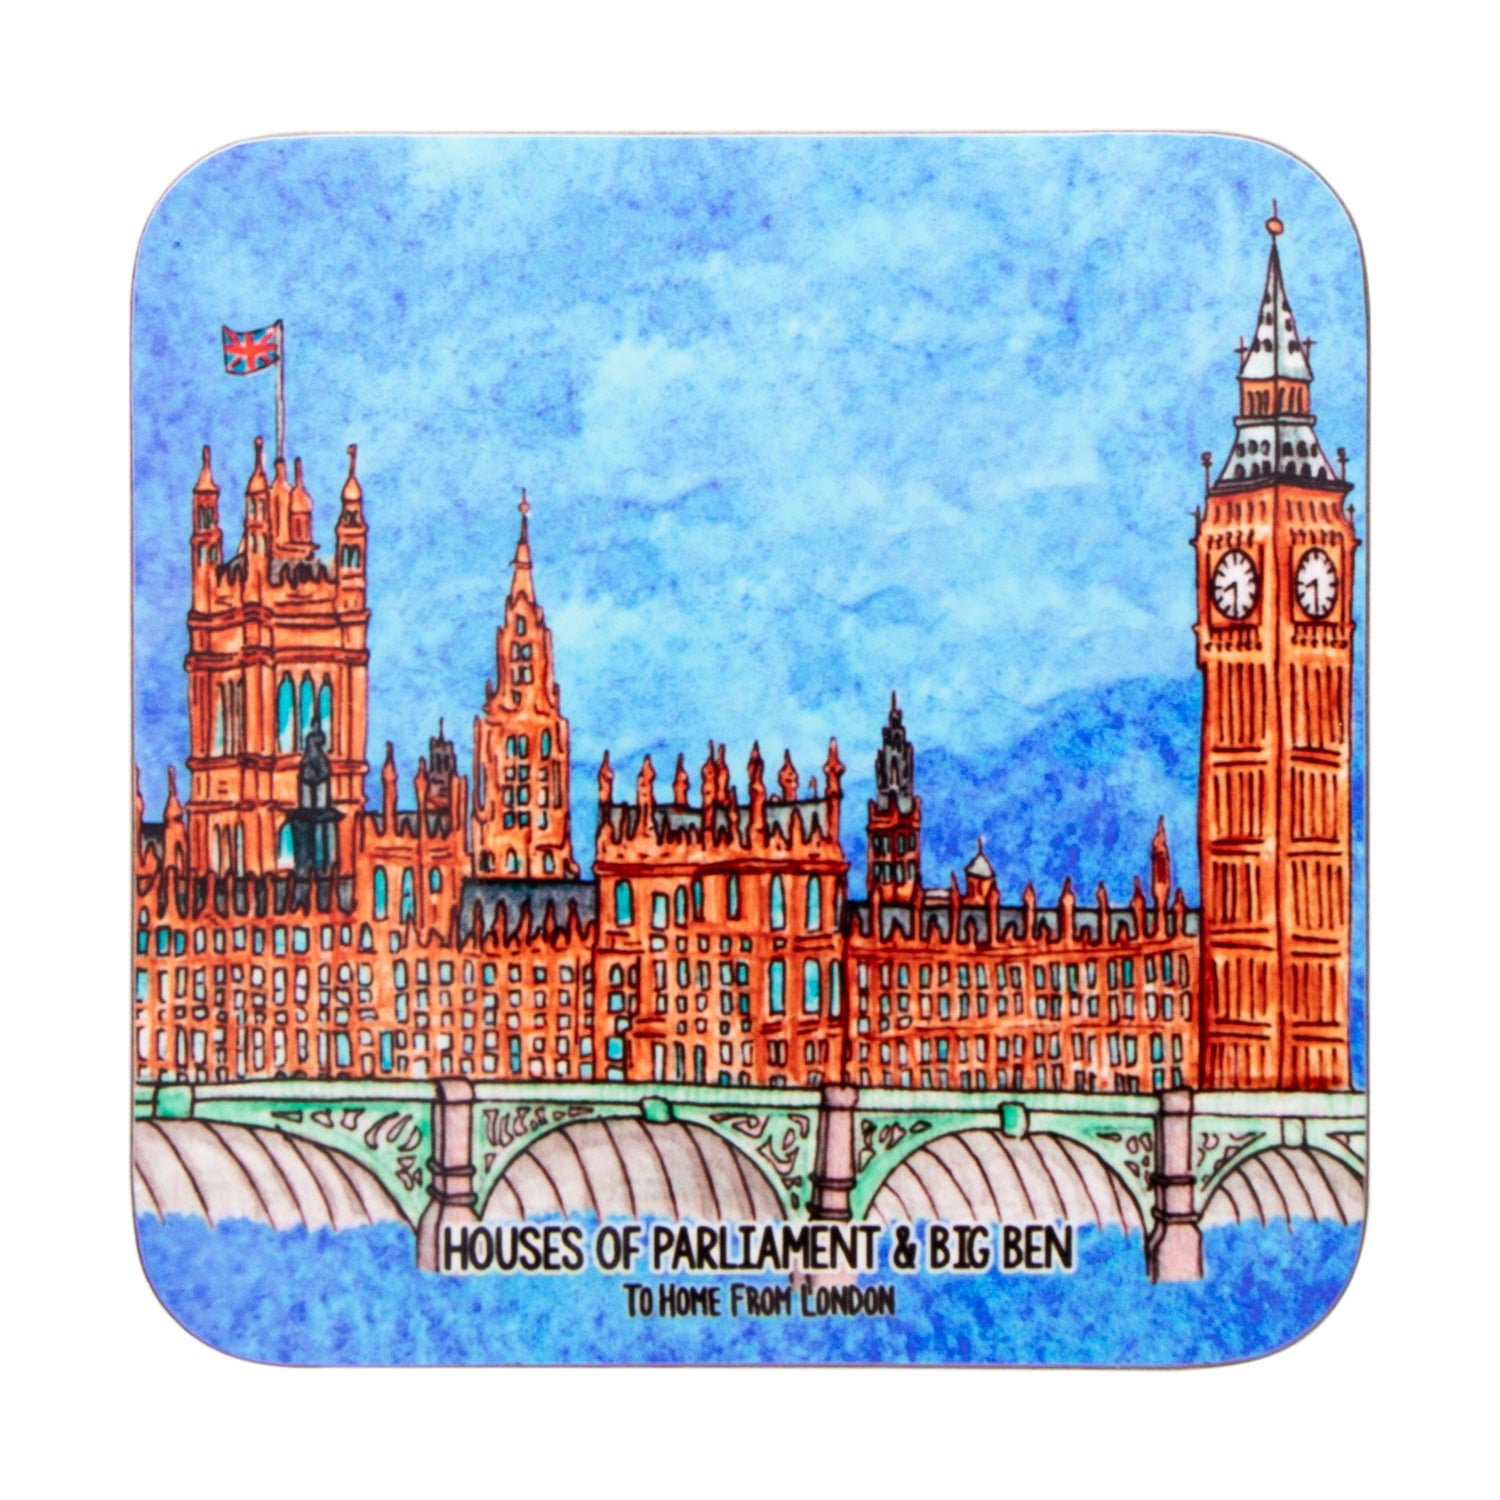 To Home From London Magnetic Coaster - Big Ben & Parliament